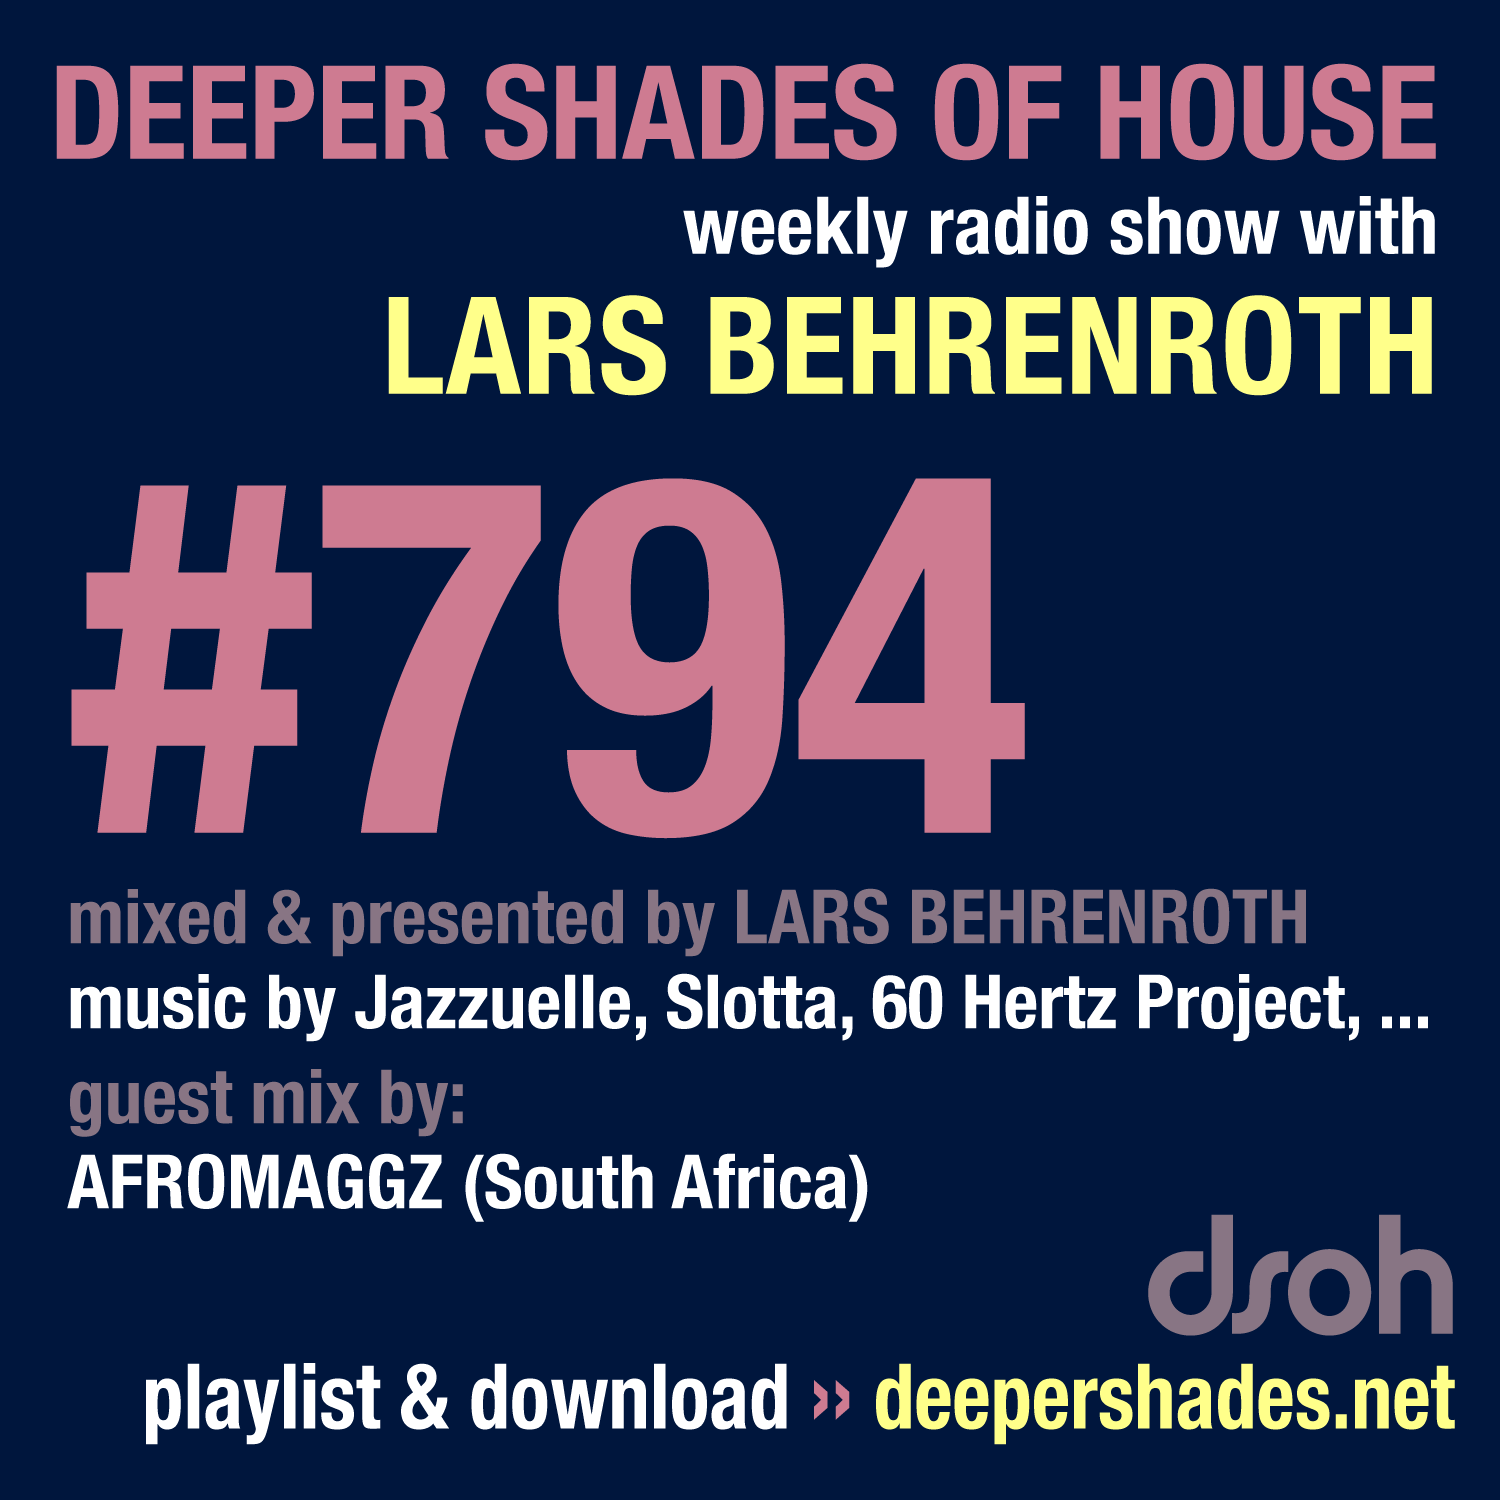 #794 Deeper Shades of House